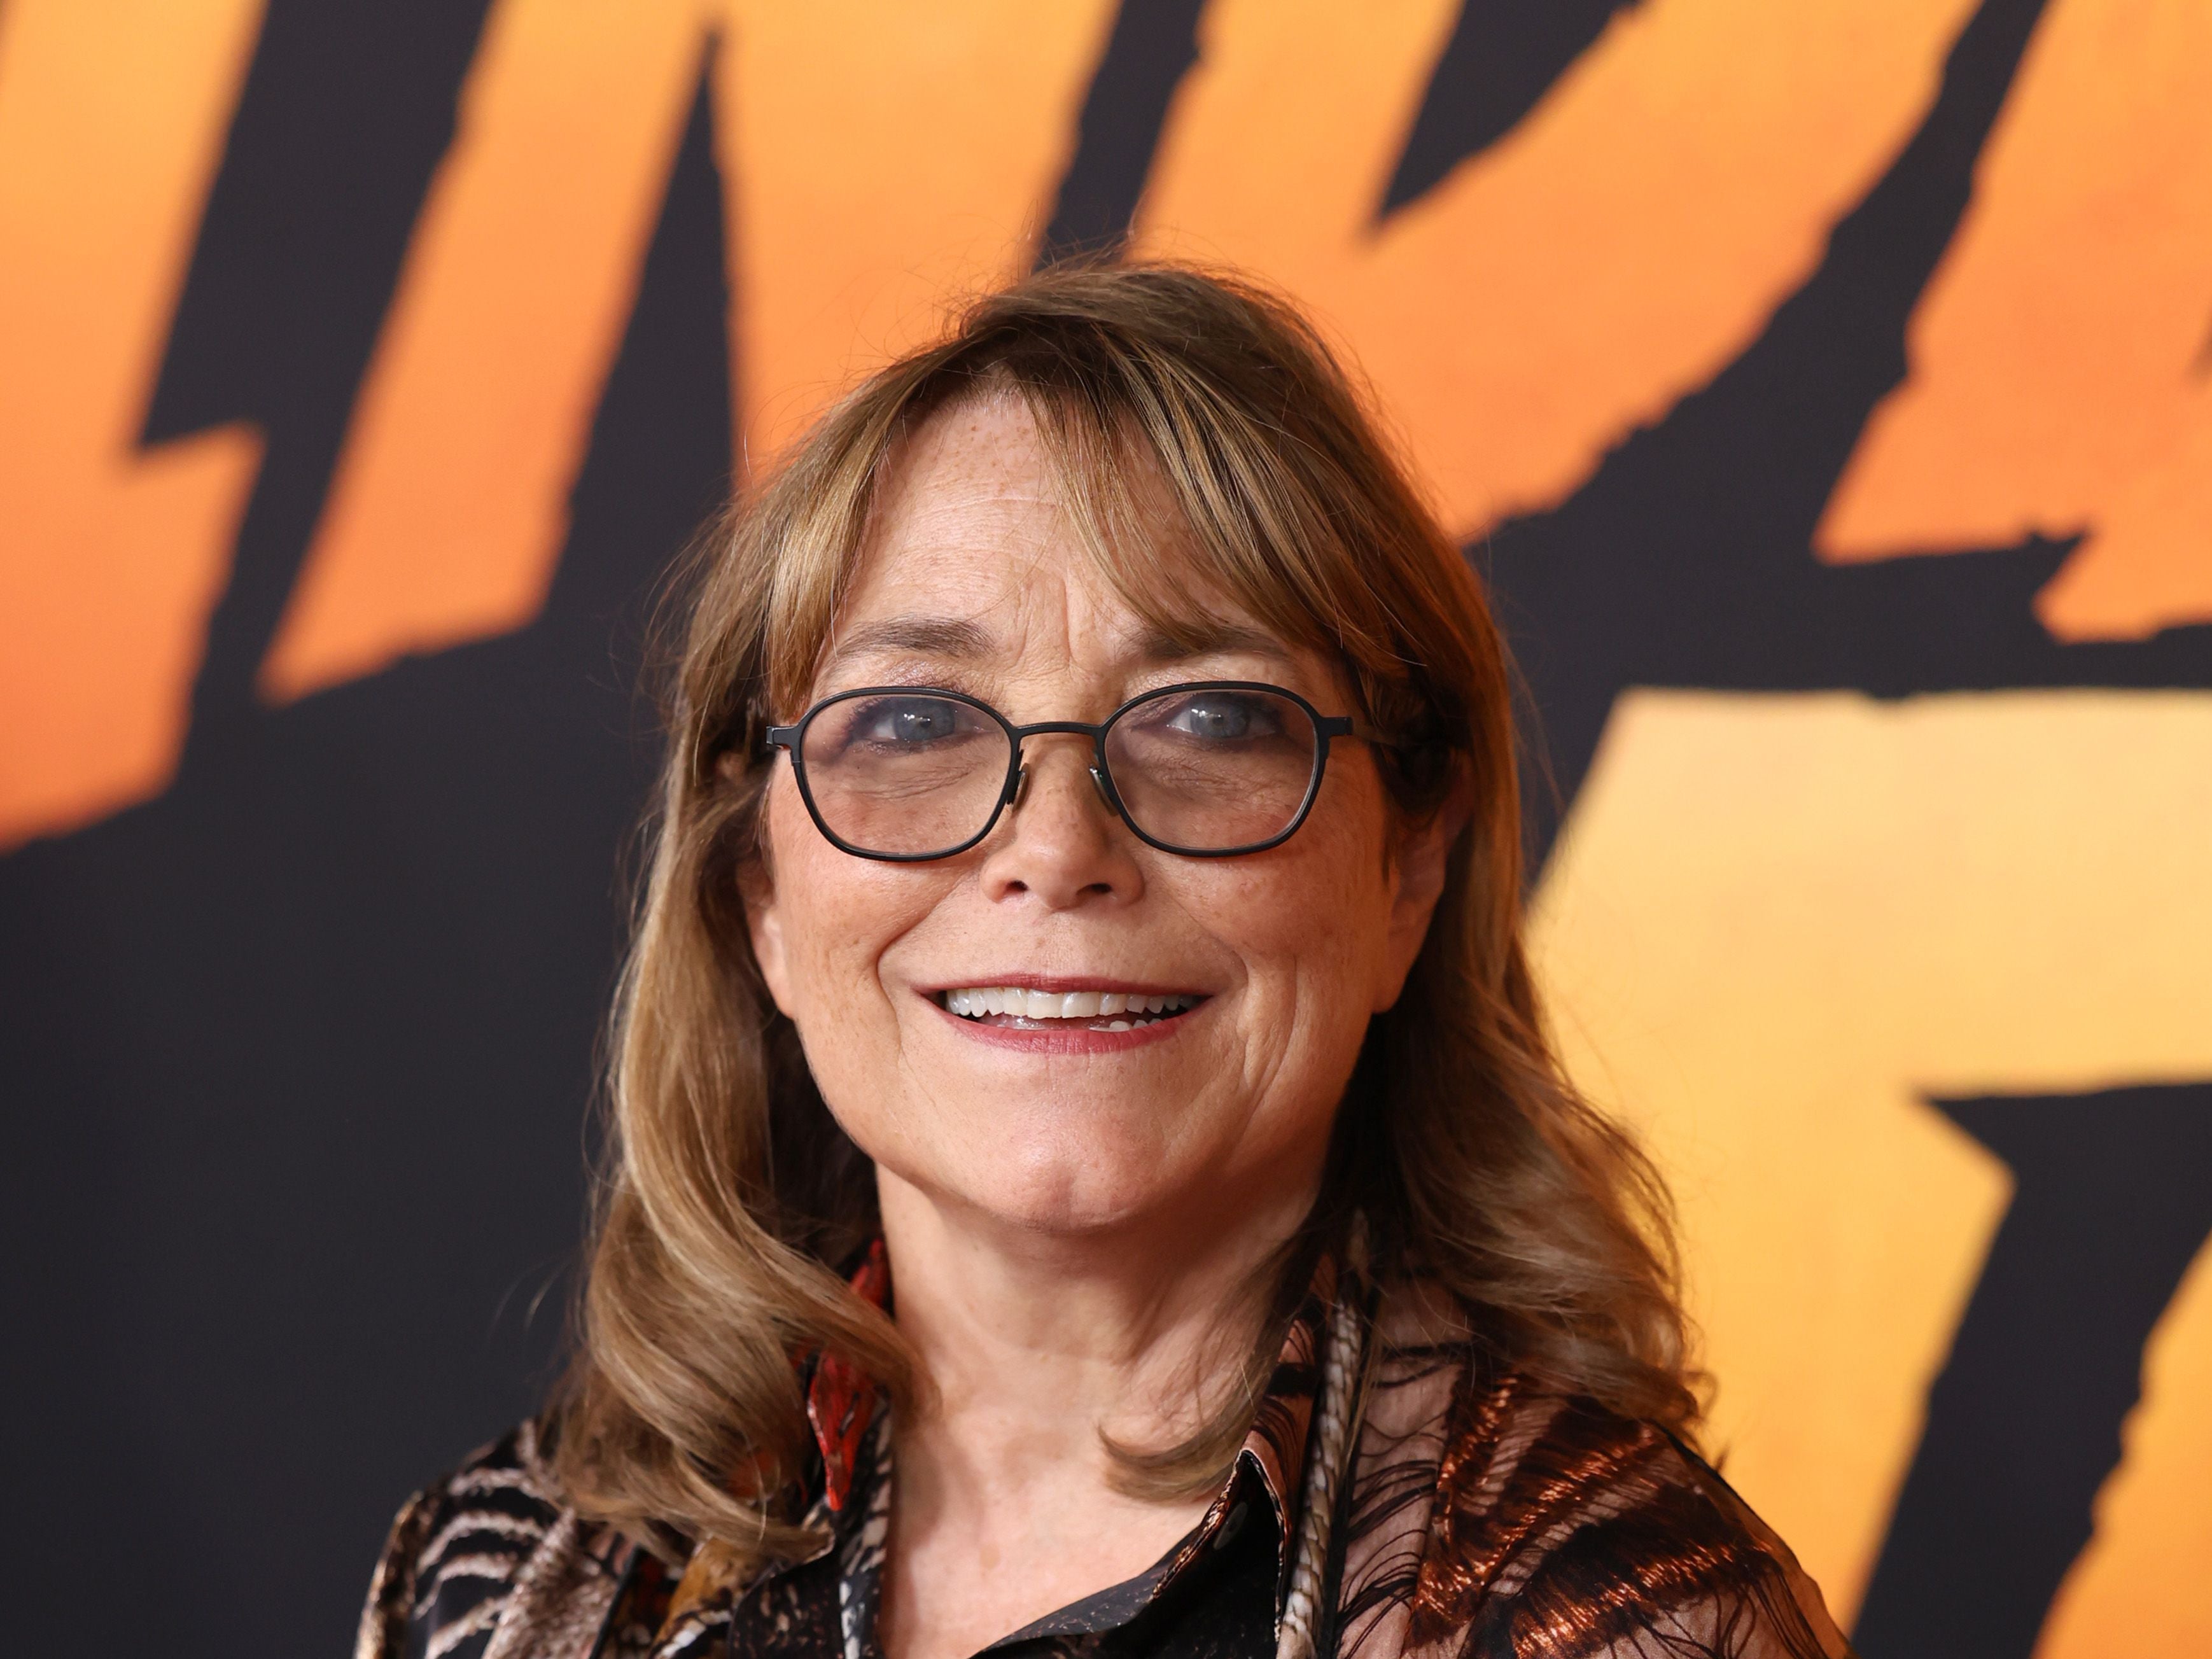 Karen Allen attends the Indiana Jones and the Dial of Destiny U.S. Premiere at the Dolby Theatre in Hollywood, California on June 14, 2023.